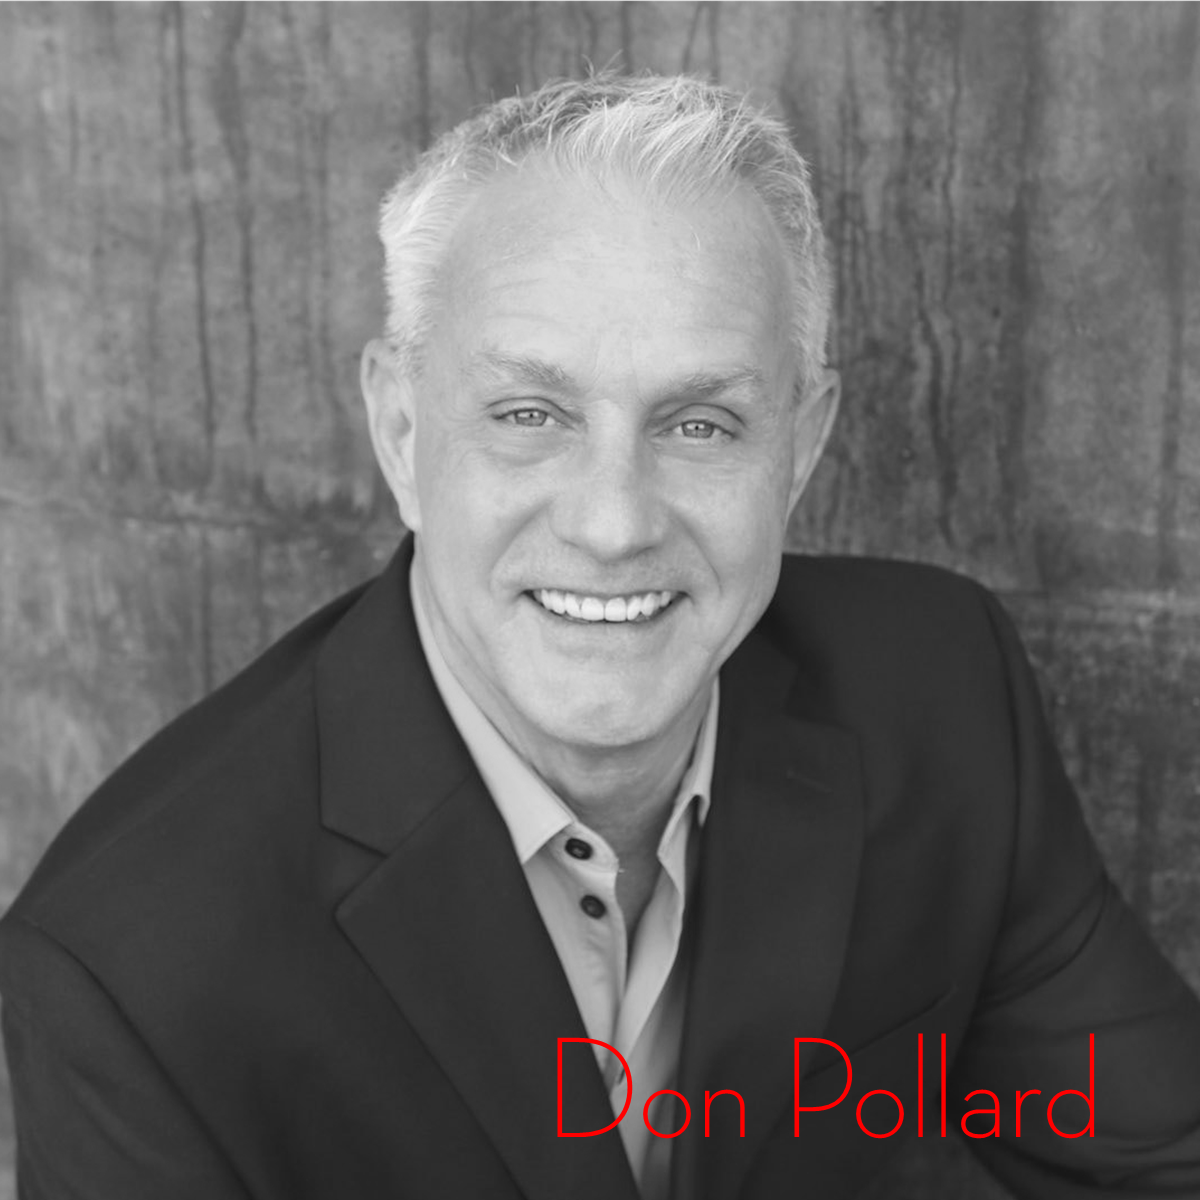 Don Pollard grayscale with name